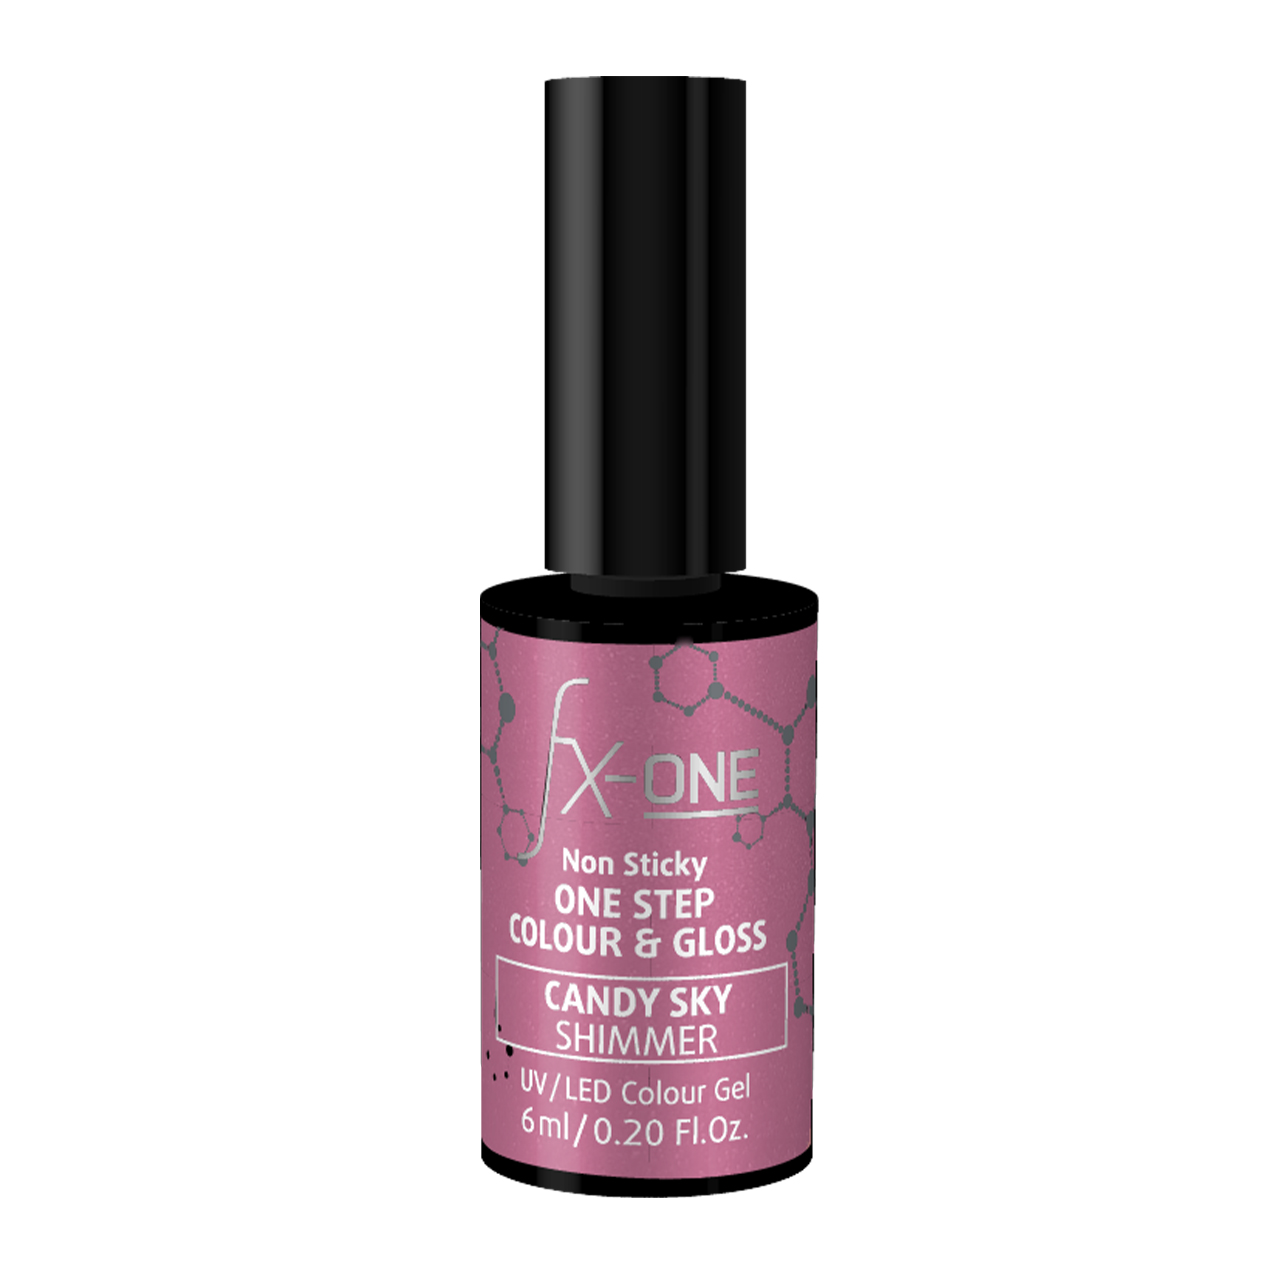 FX-One Colour & Gloss Candy Sky Shimmer